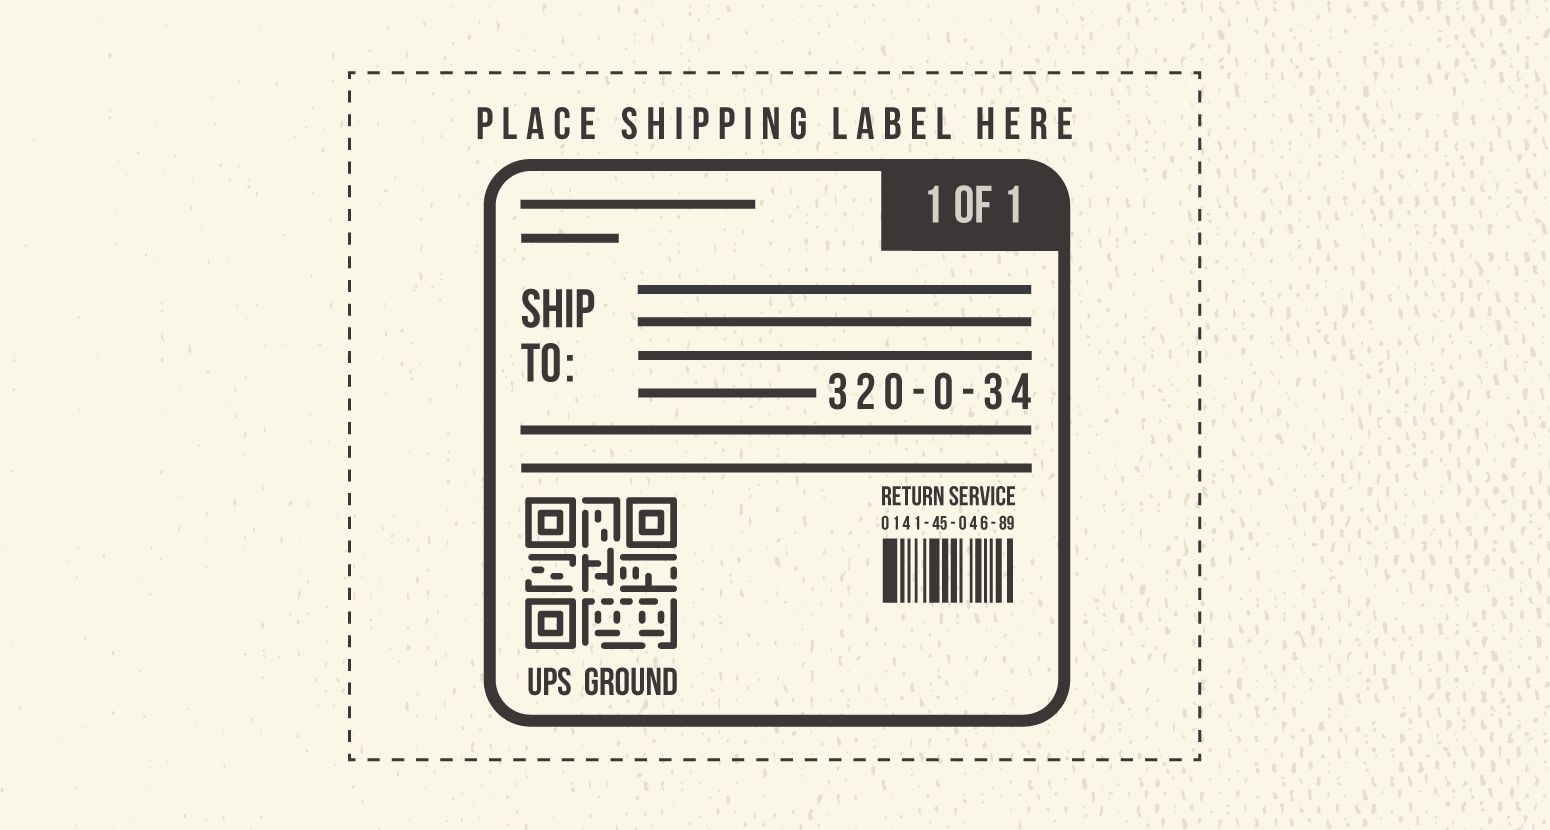 Finding the Right Shipping Fit